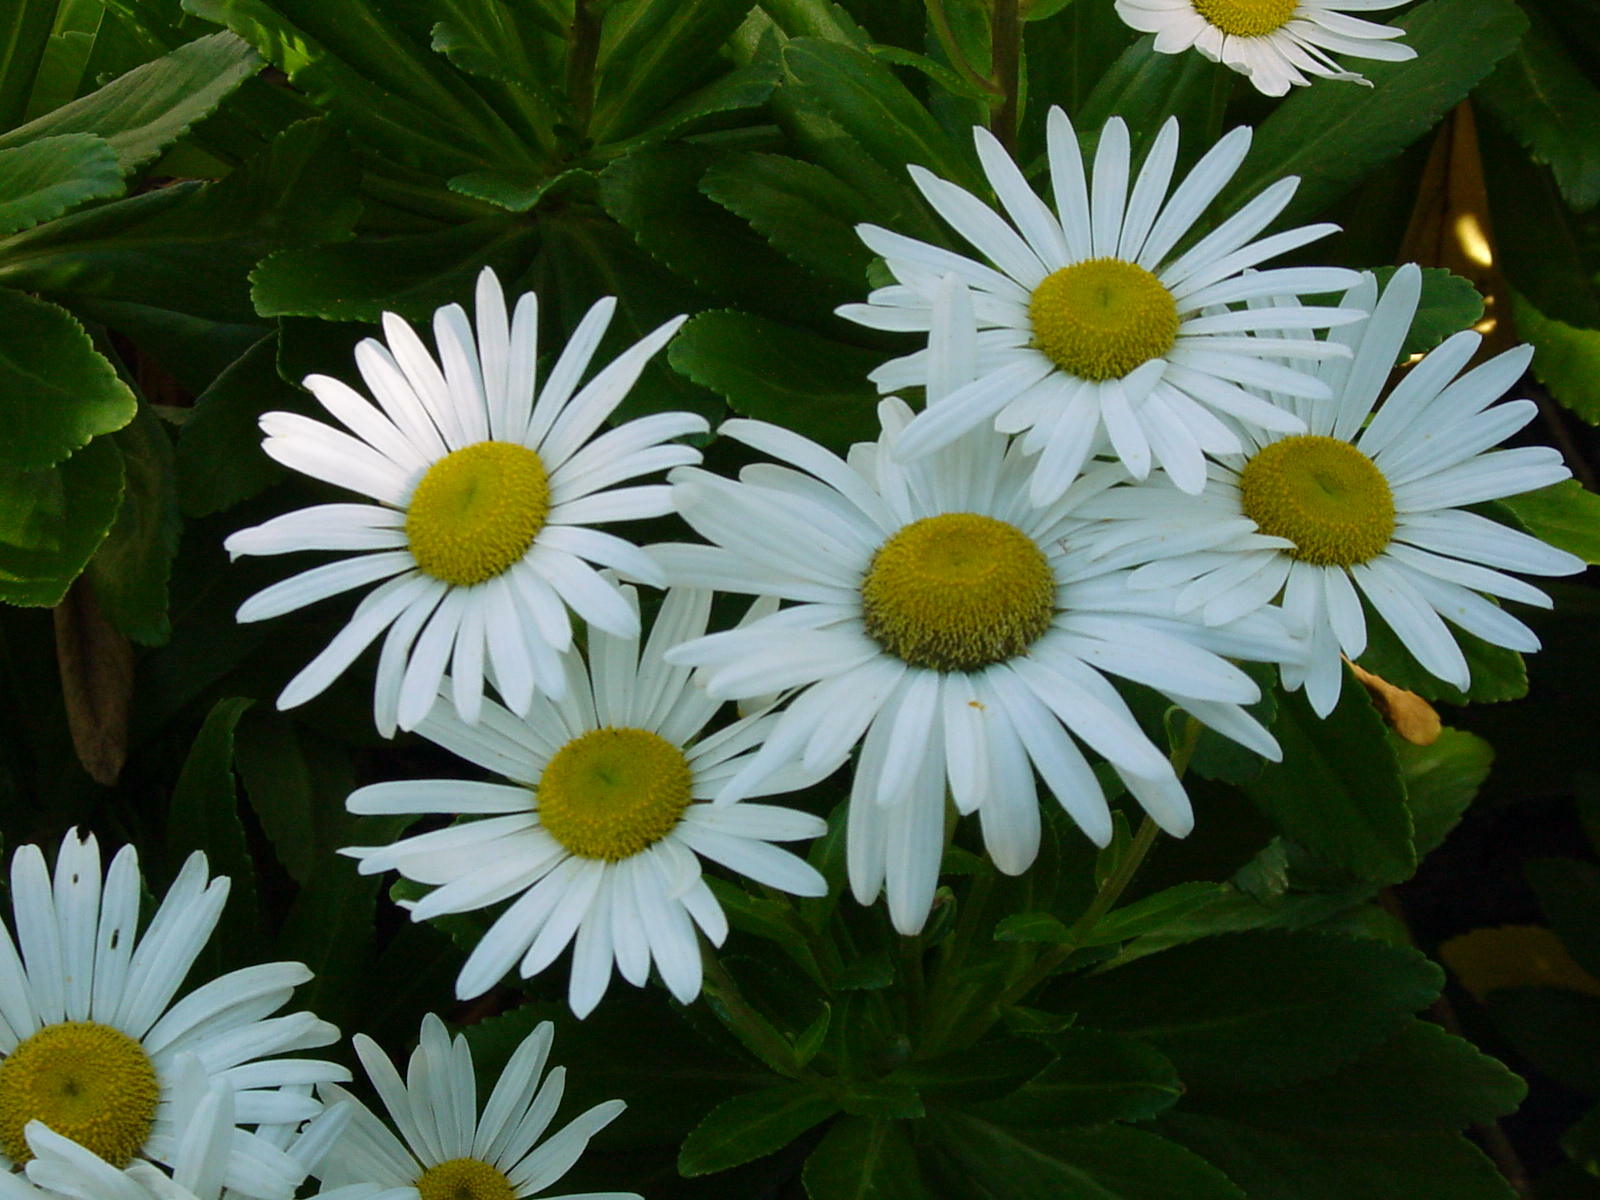 Blooming now in a garden near you, the famous Montauk daisy, native to Japan but naturalized along the sandy shores of the East End. Disease and insect free, a great pollinator and a late feeding spot for honeybees and monarch butterflies. Sorry, only available in white.